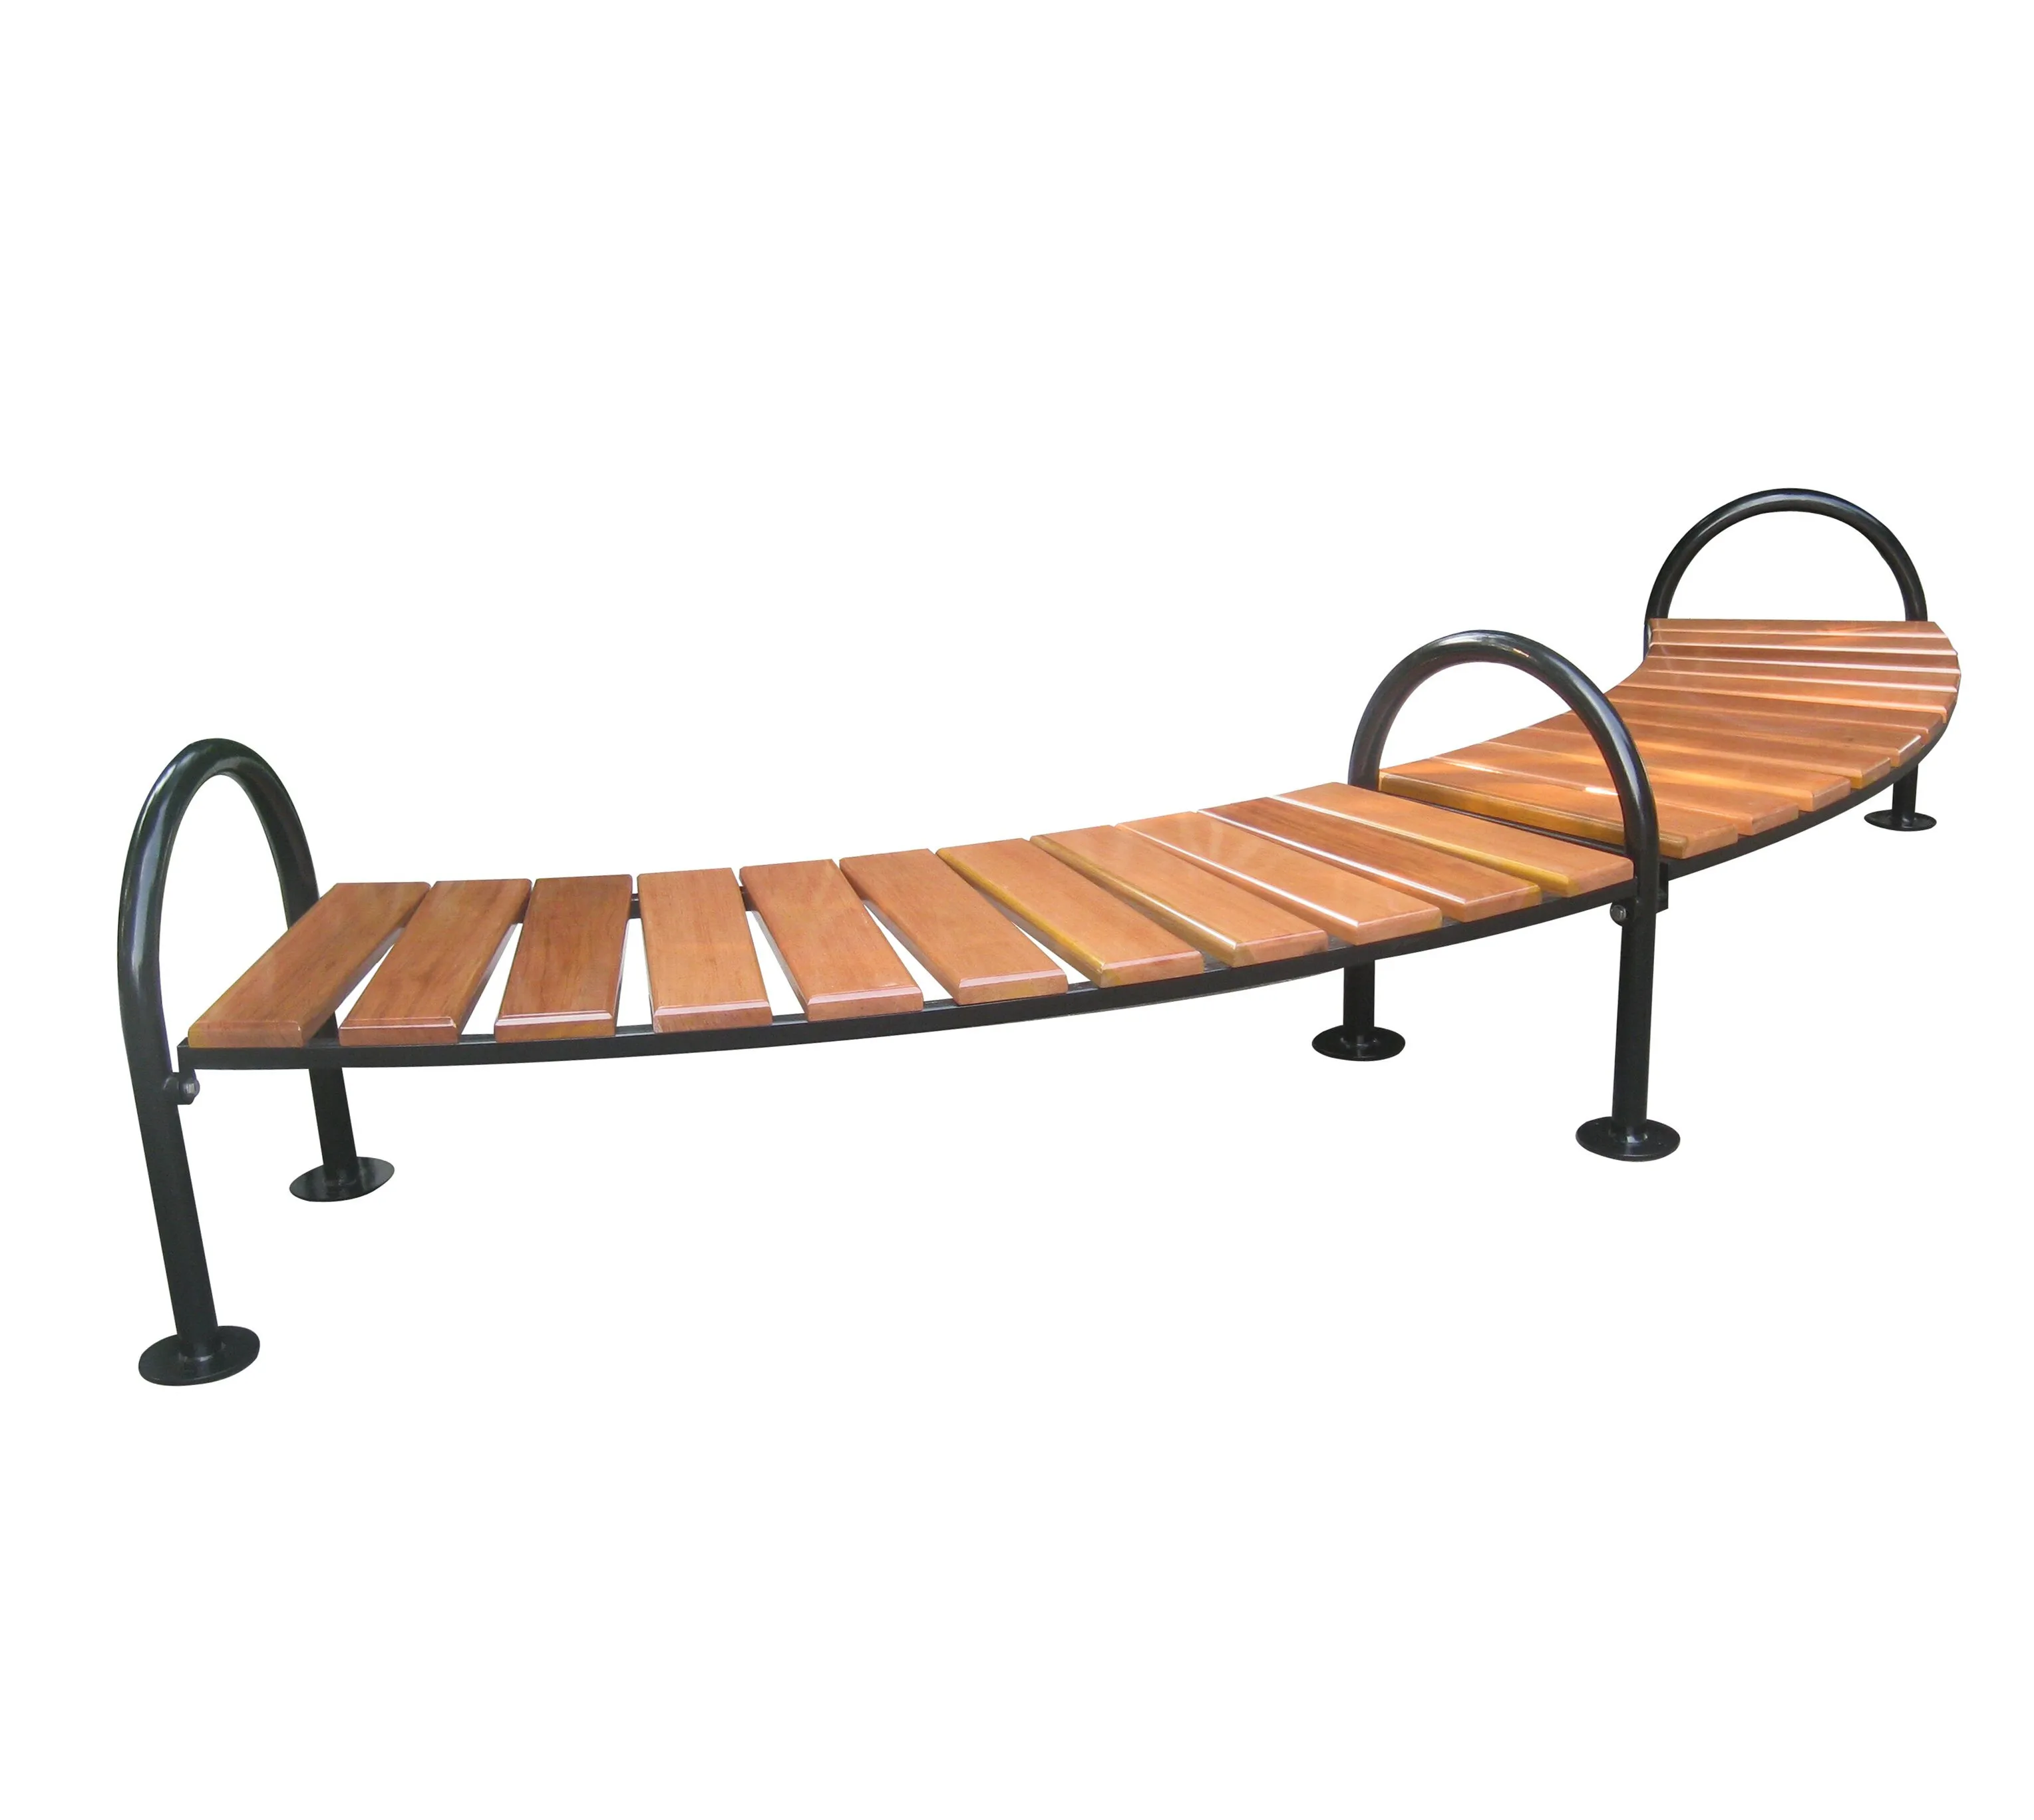 Curved Outdoor Bench Outdoor Curved Benches With Indonesia Solid Wood Seating Buy Curved Outdoor Bench